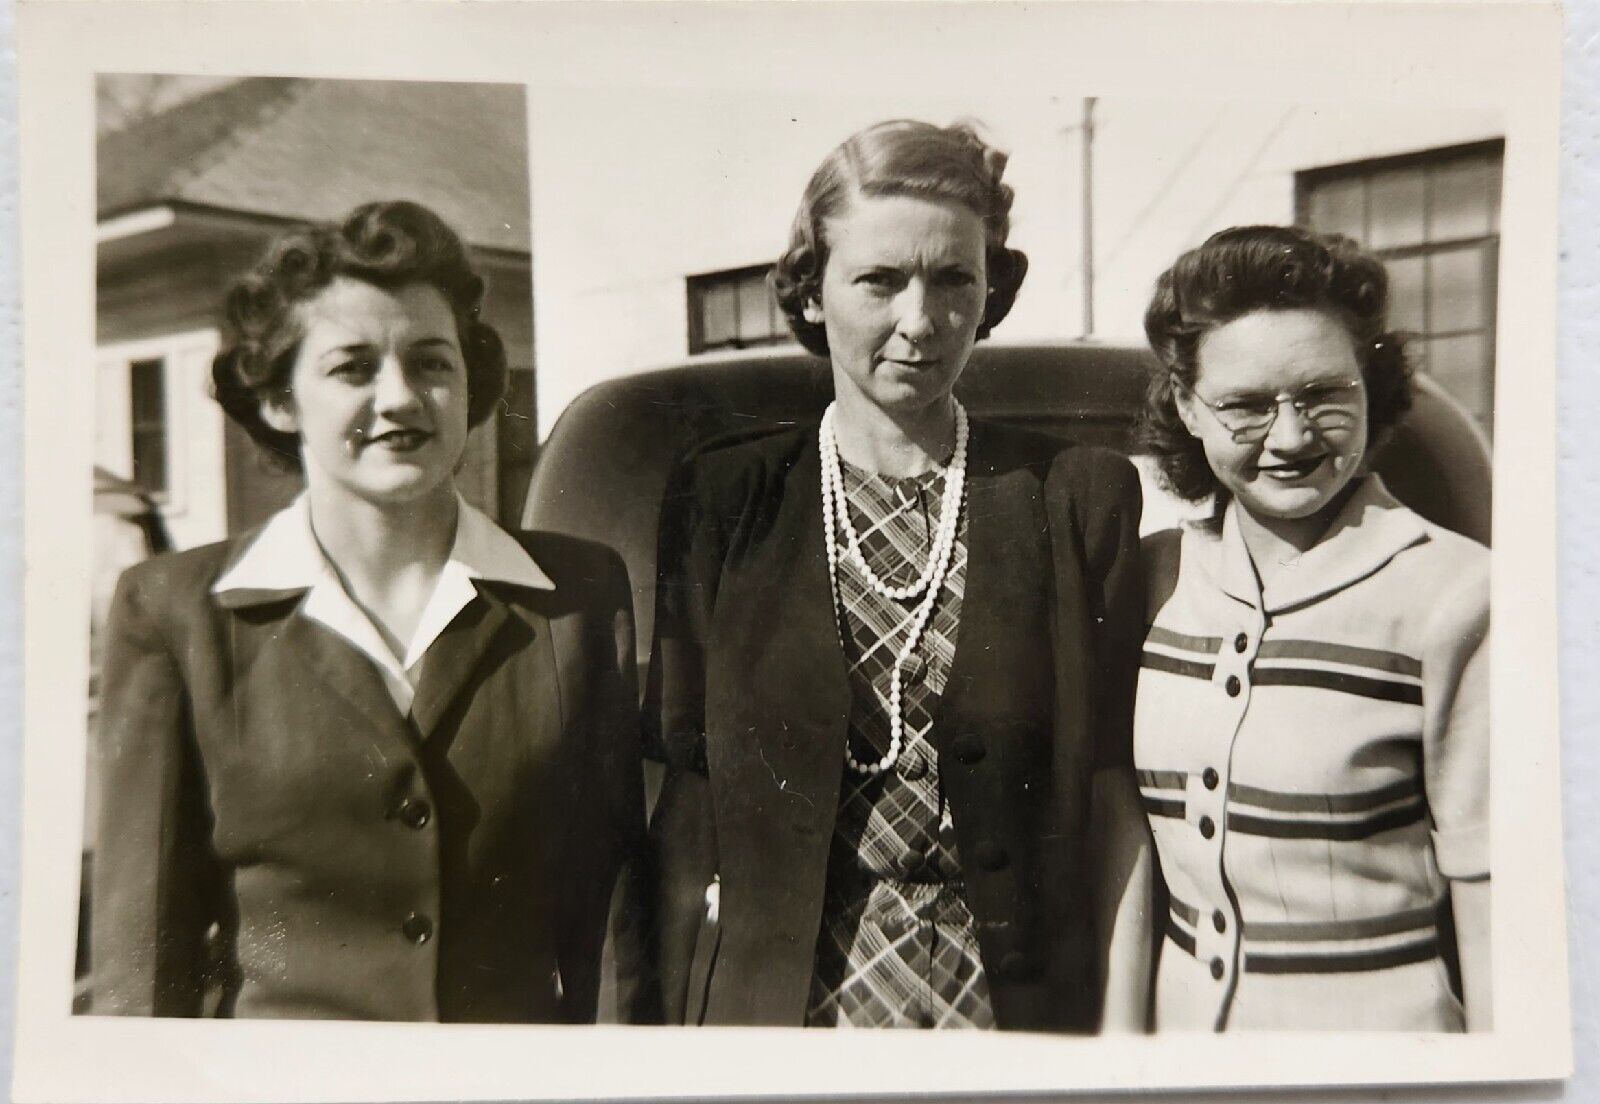 Vintage Black And White Photograph Of 3 Women